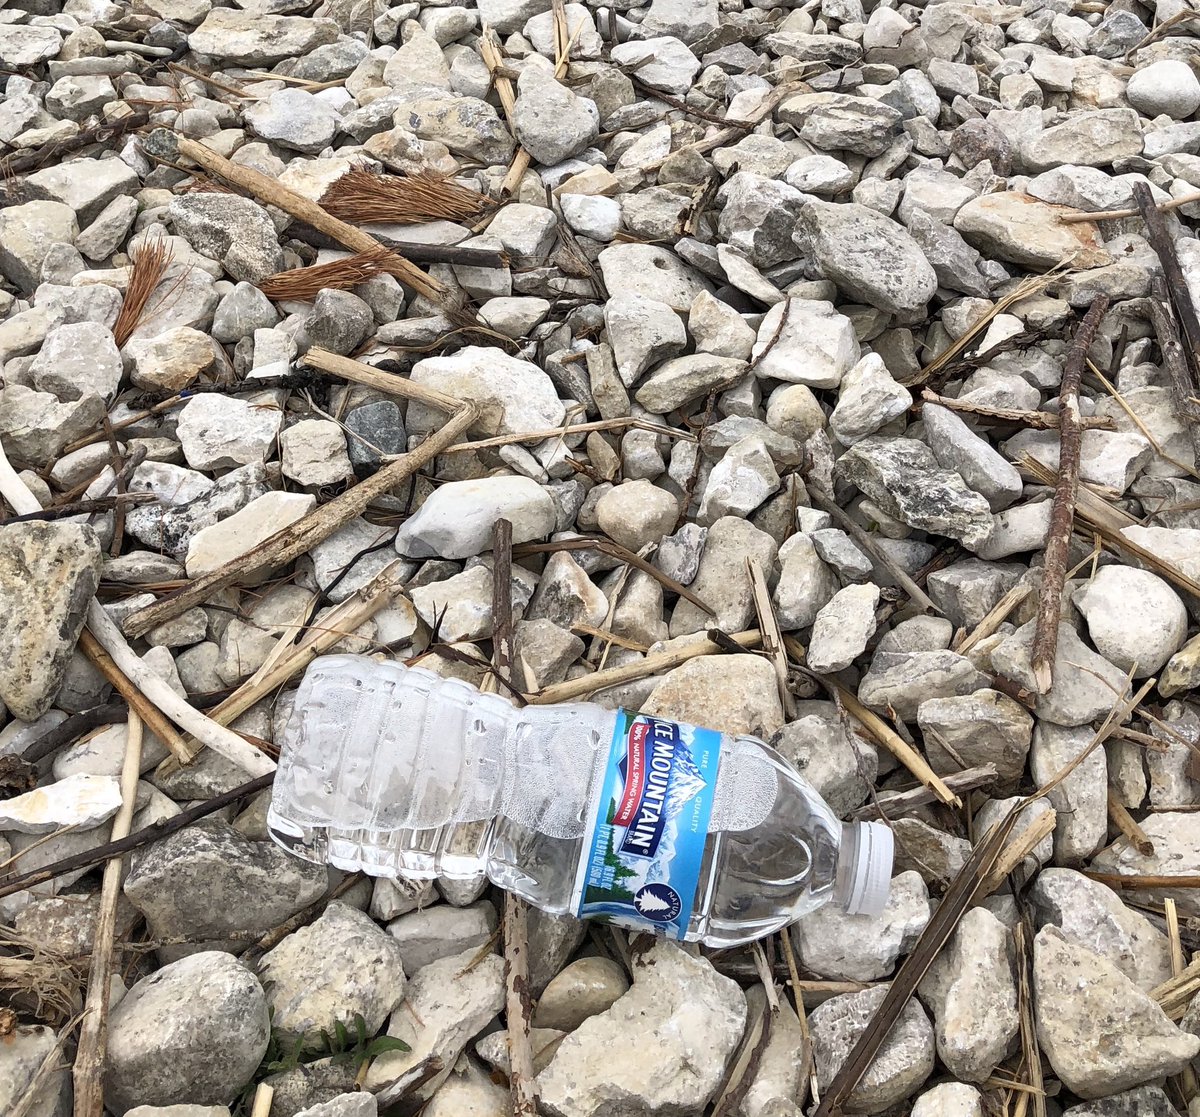 About 1 million single use plastic beverage bottles are purchased EVERY MINUTE on earth. What the heck are you doing, humans? #plasticfree #refillnotlandfill